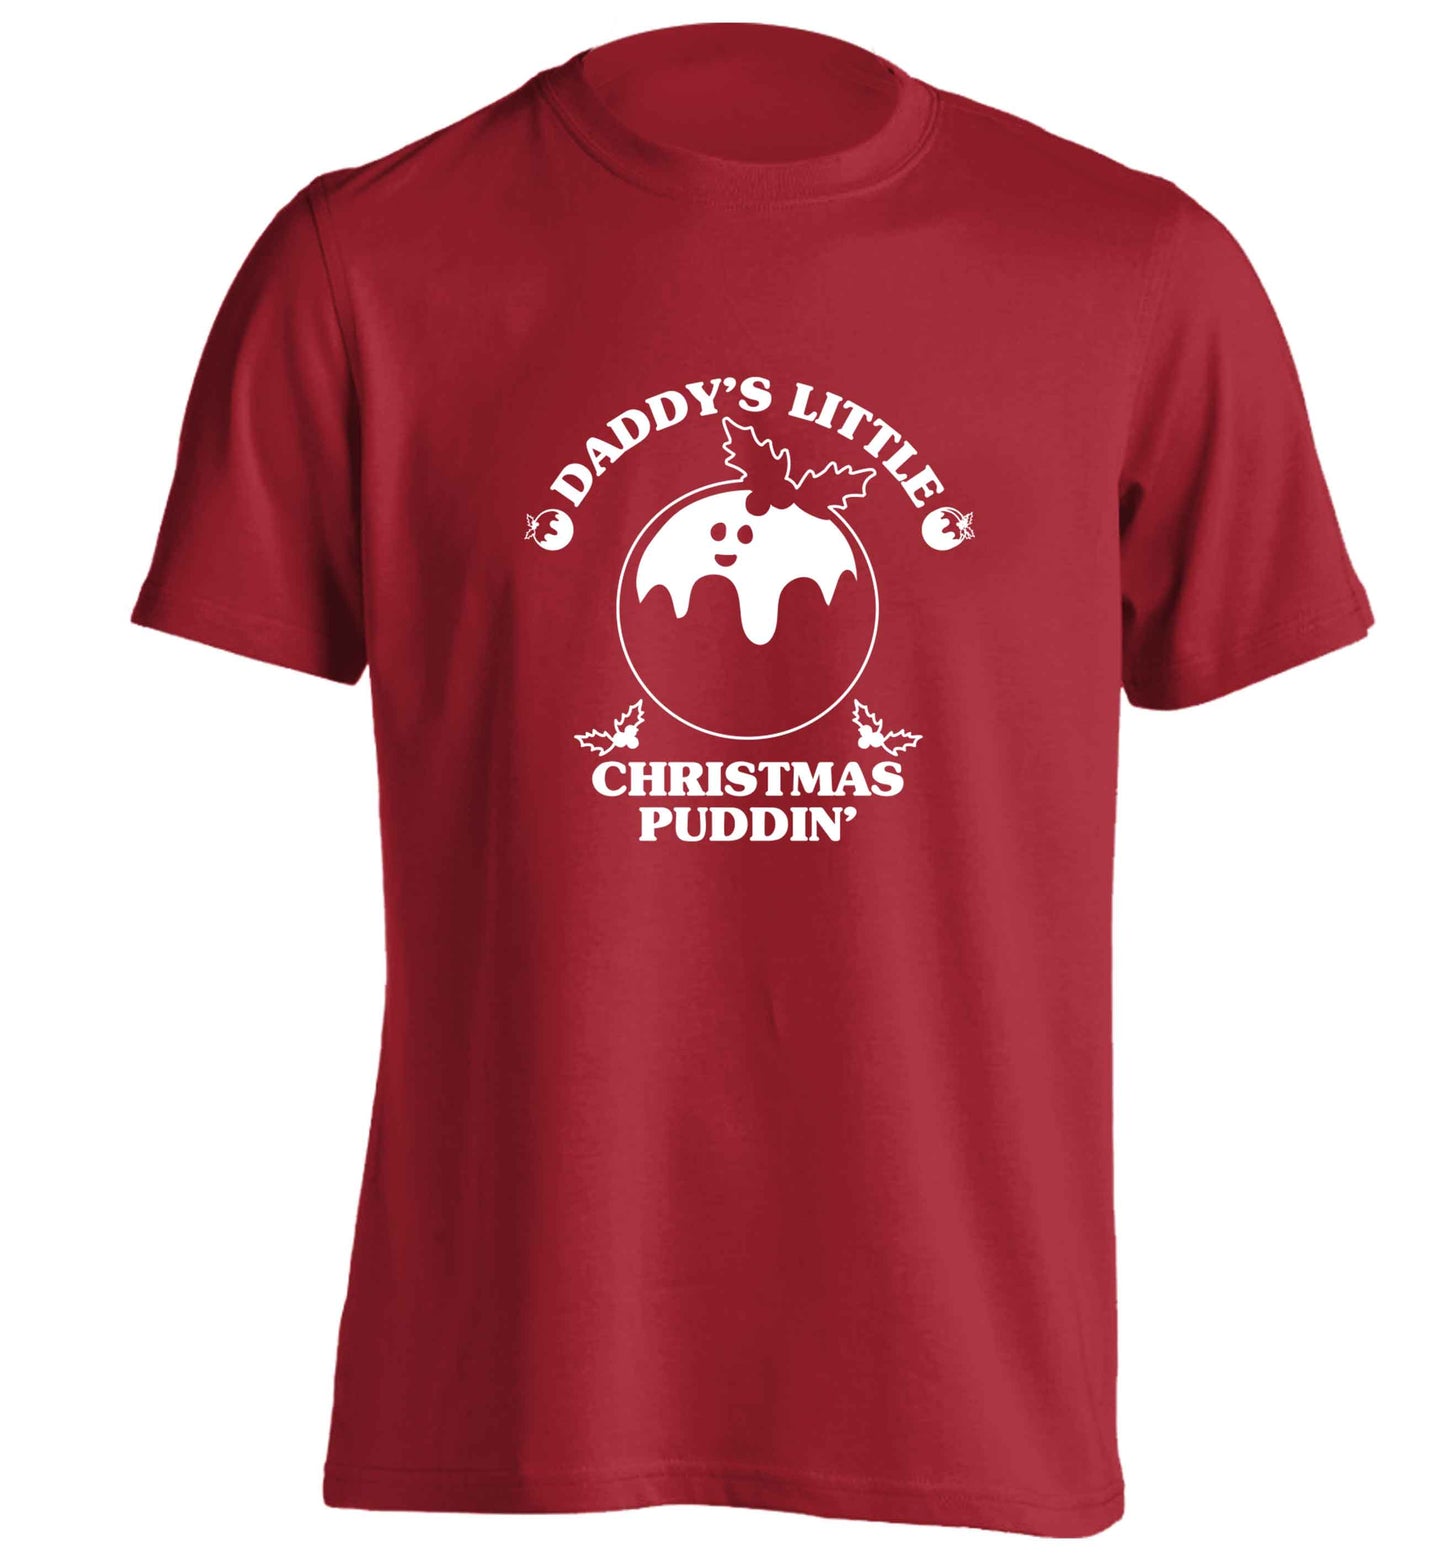 Daddy's little Christmas puddin' adults unisex red Tshirt 2XL